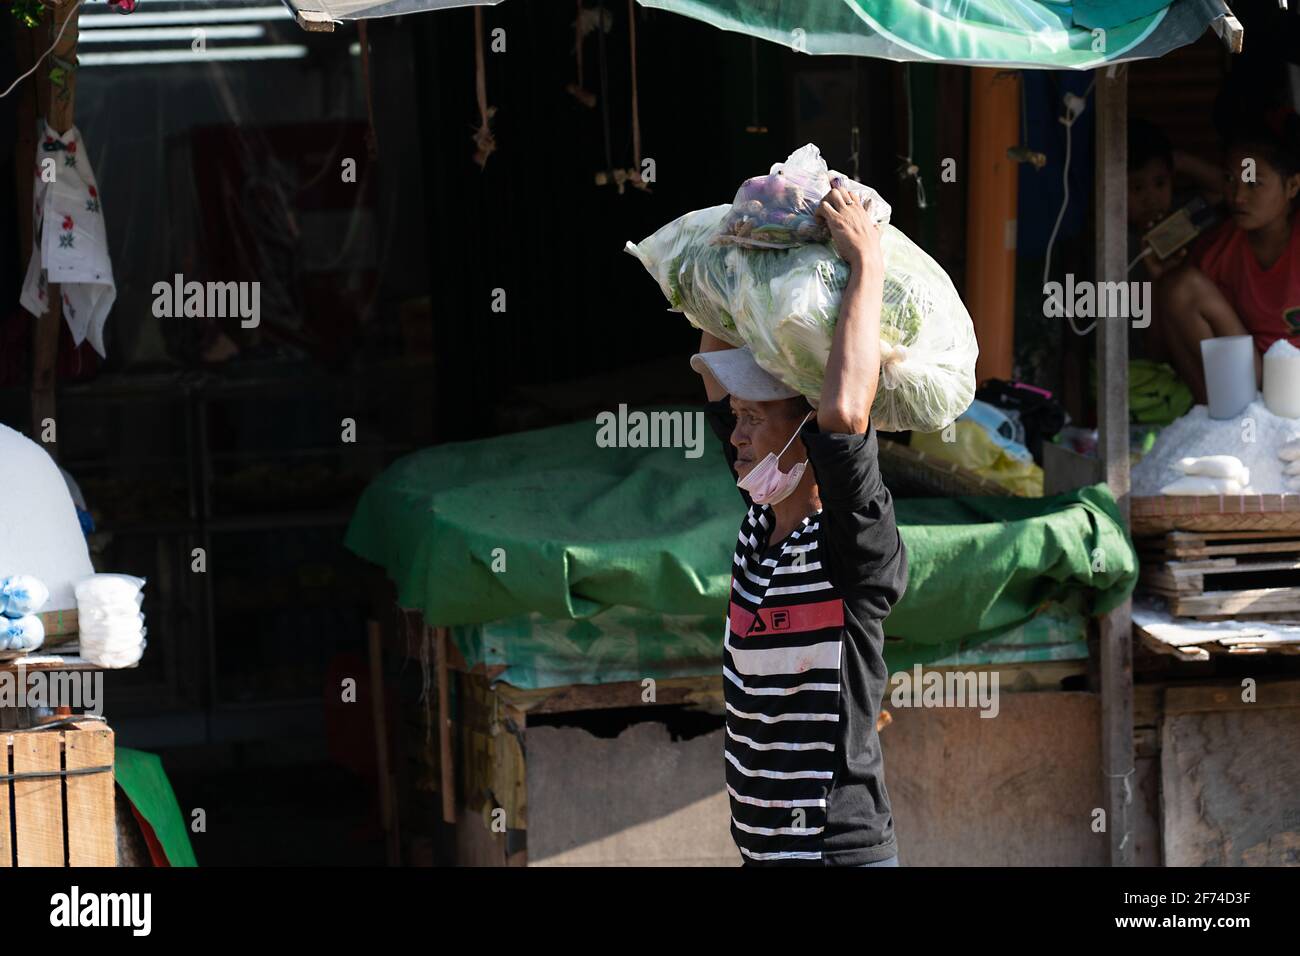 A man carrying a heavy load of vegaetables in a market area, Cebu City, Philippines Stock Photo